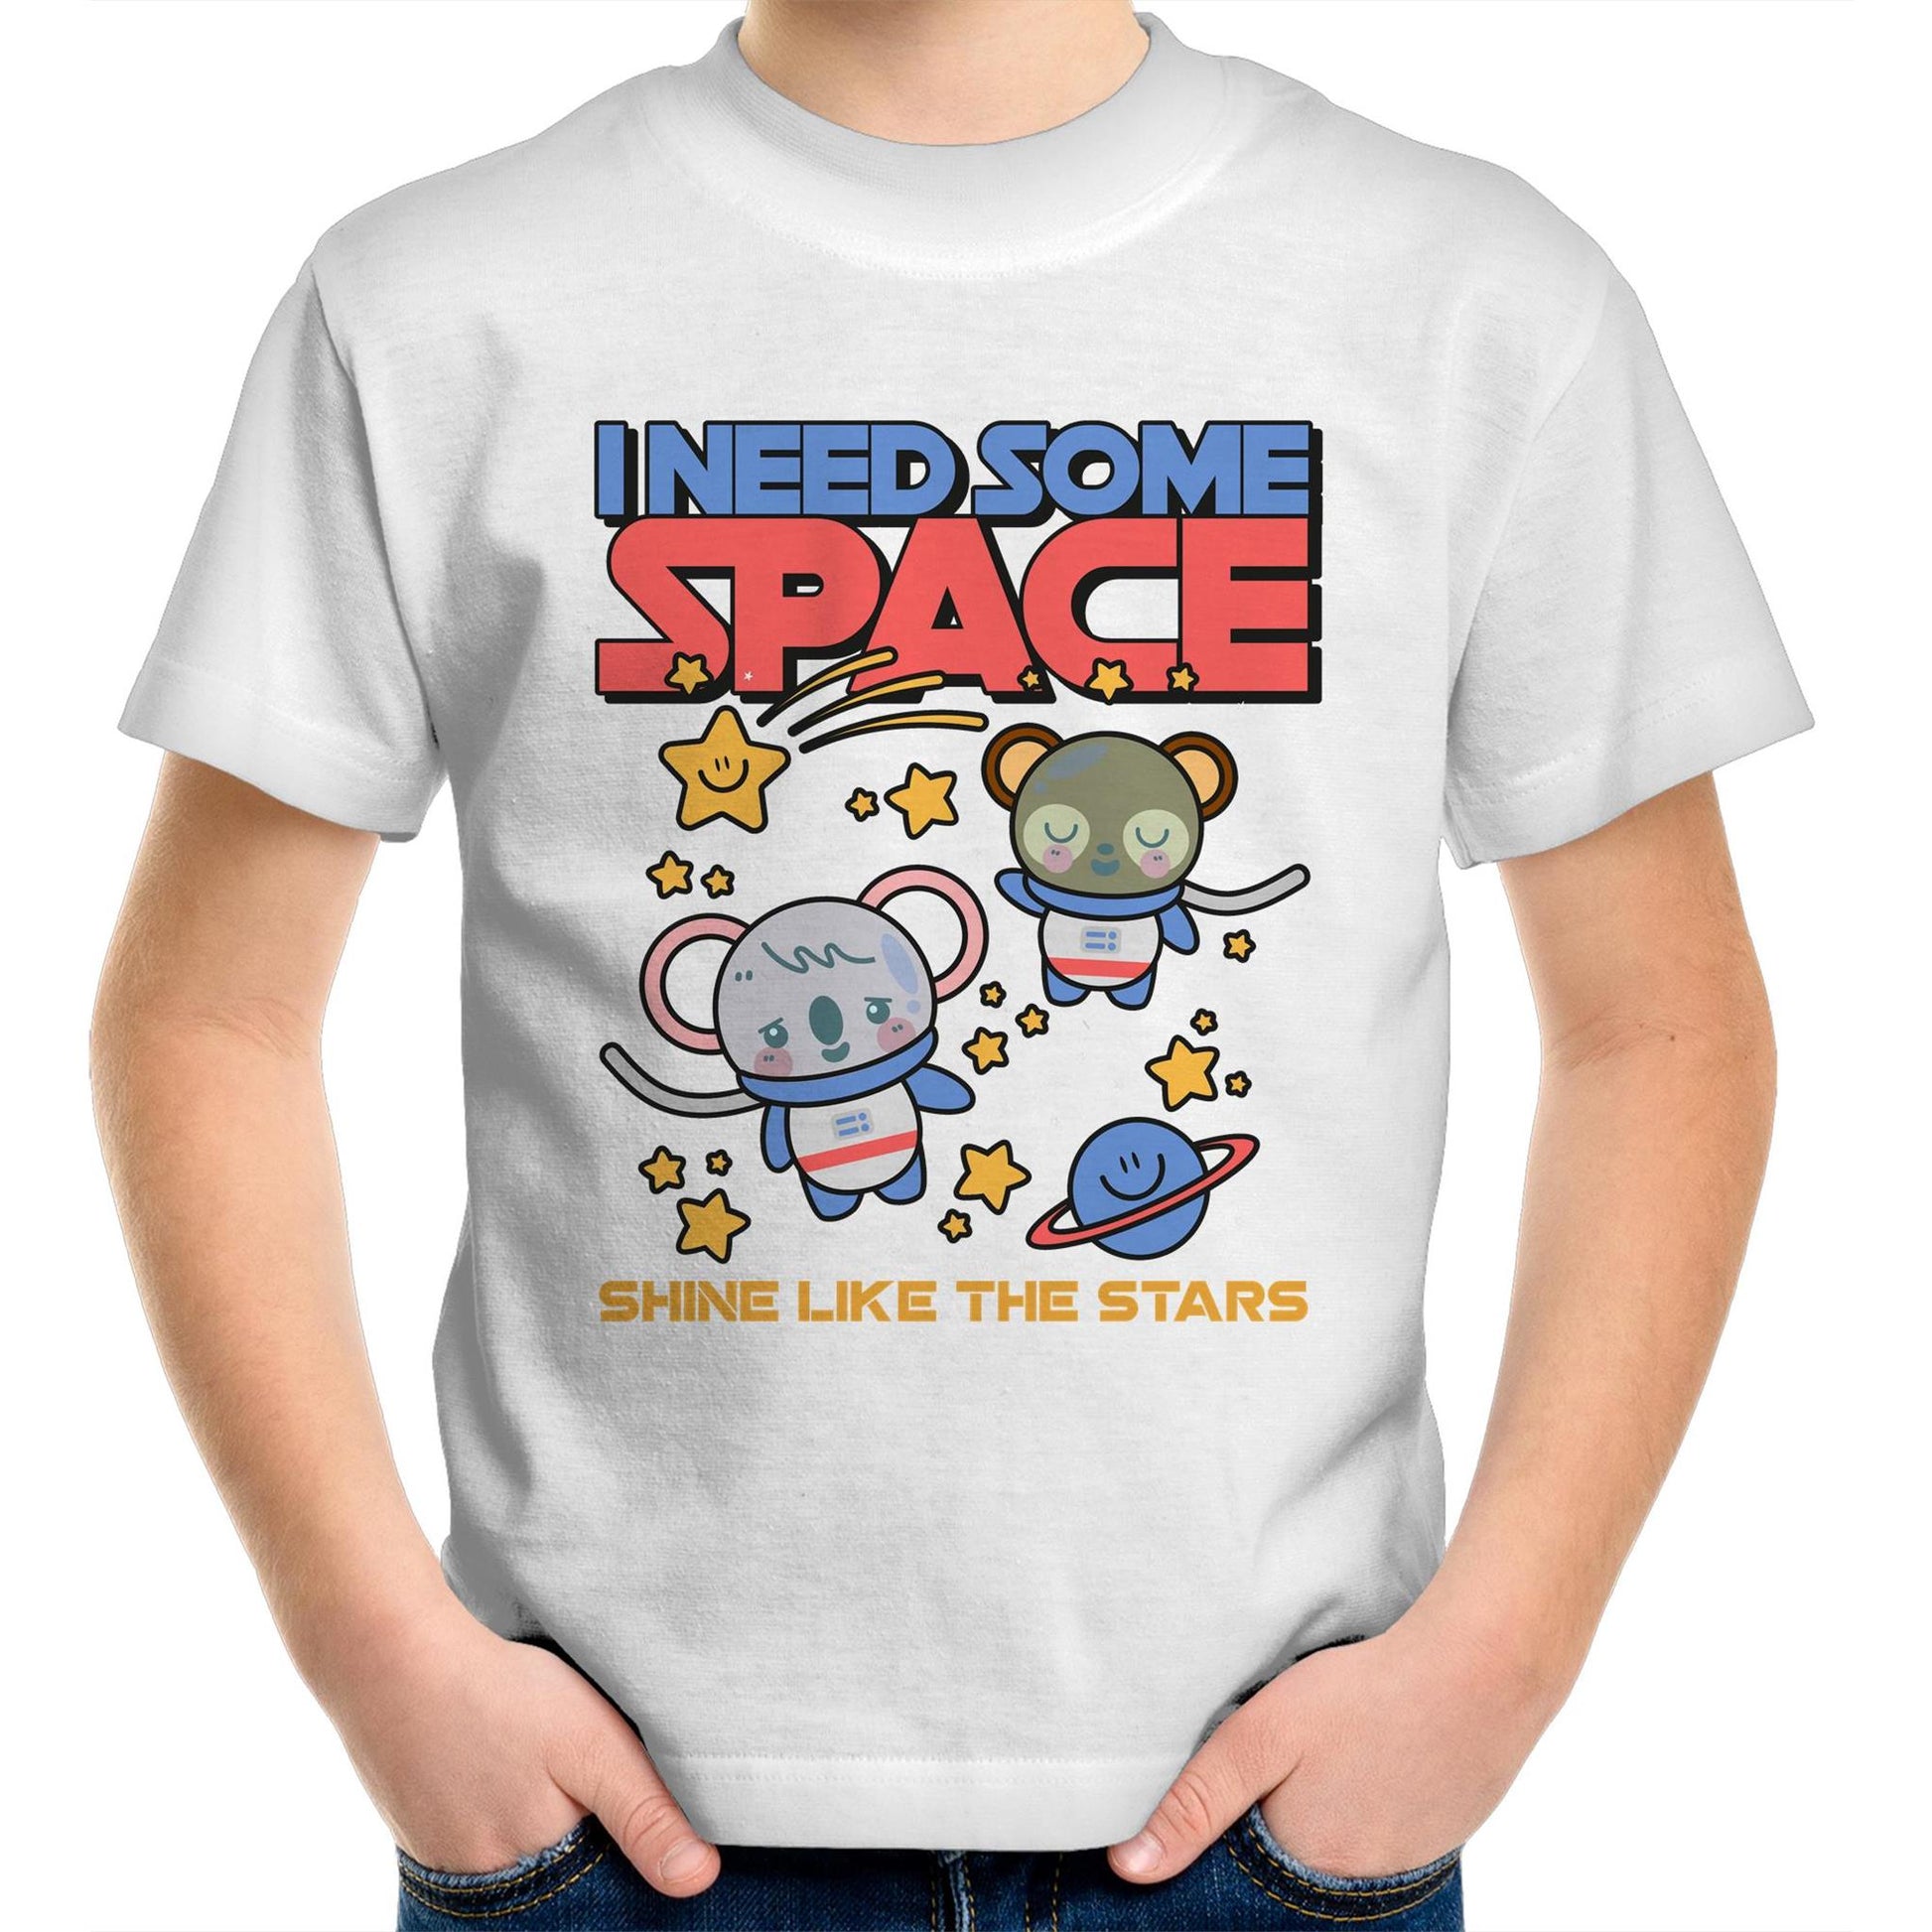 I Need Some Space - Kids Youth Crew T-Shirt White Kids Youth T-shirt Space